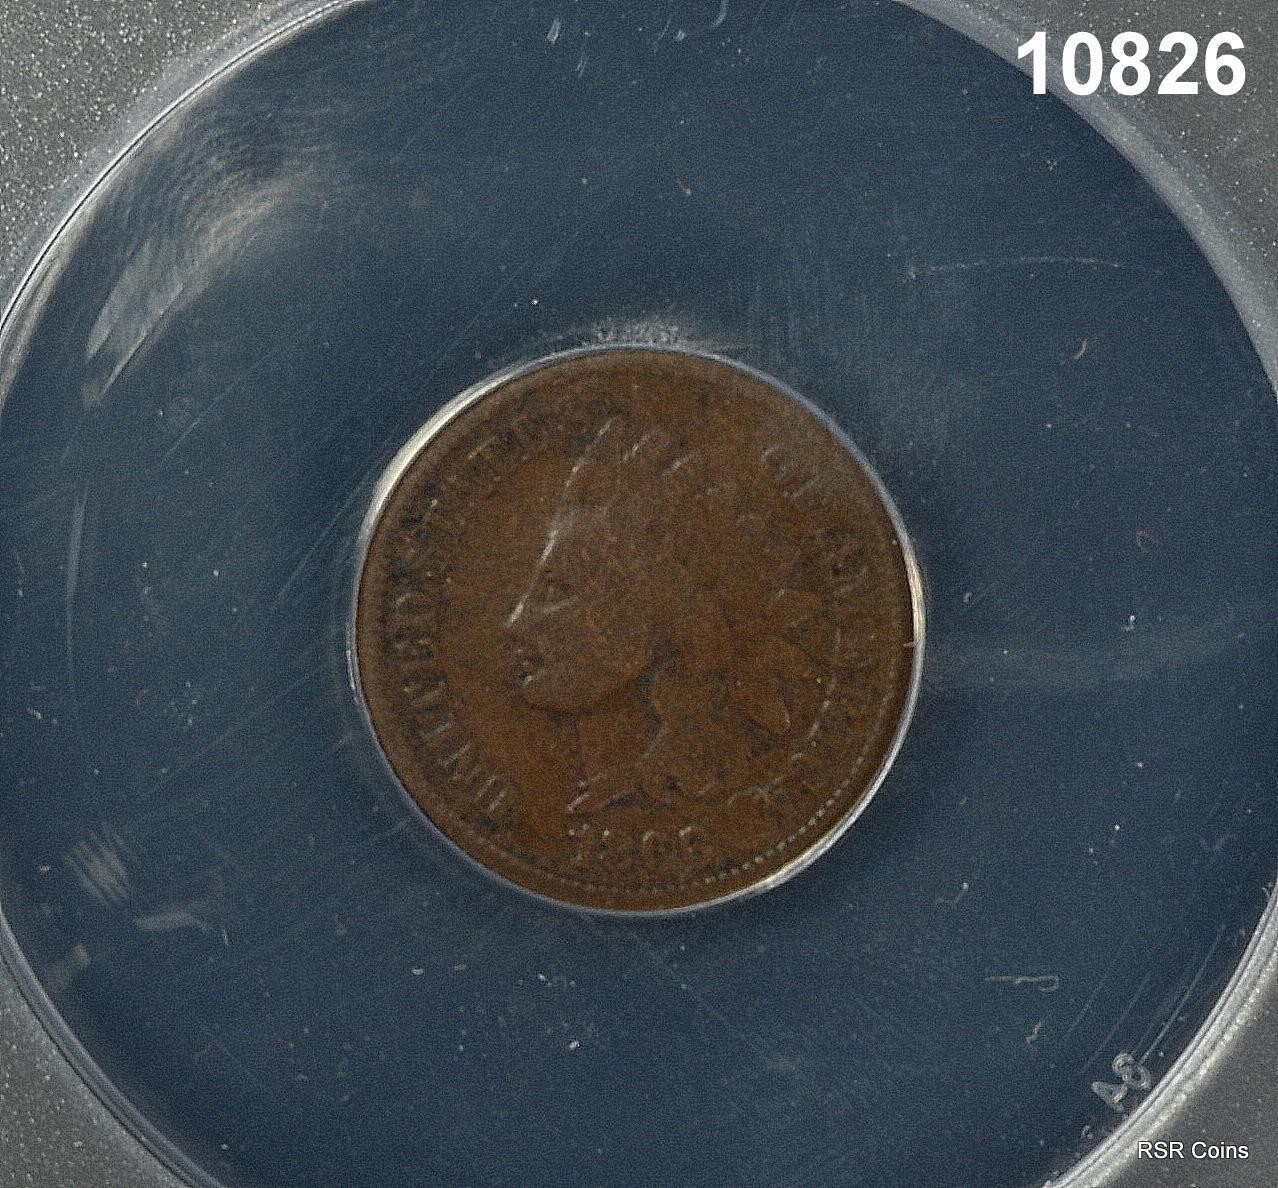 1866 INDIAN HEAD CENT ANACS CERTIFIED GOOD 6 SCARCE DATE! #10826